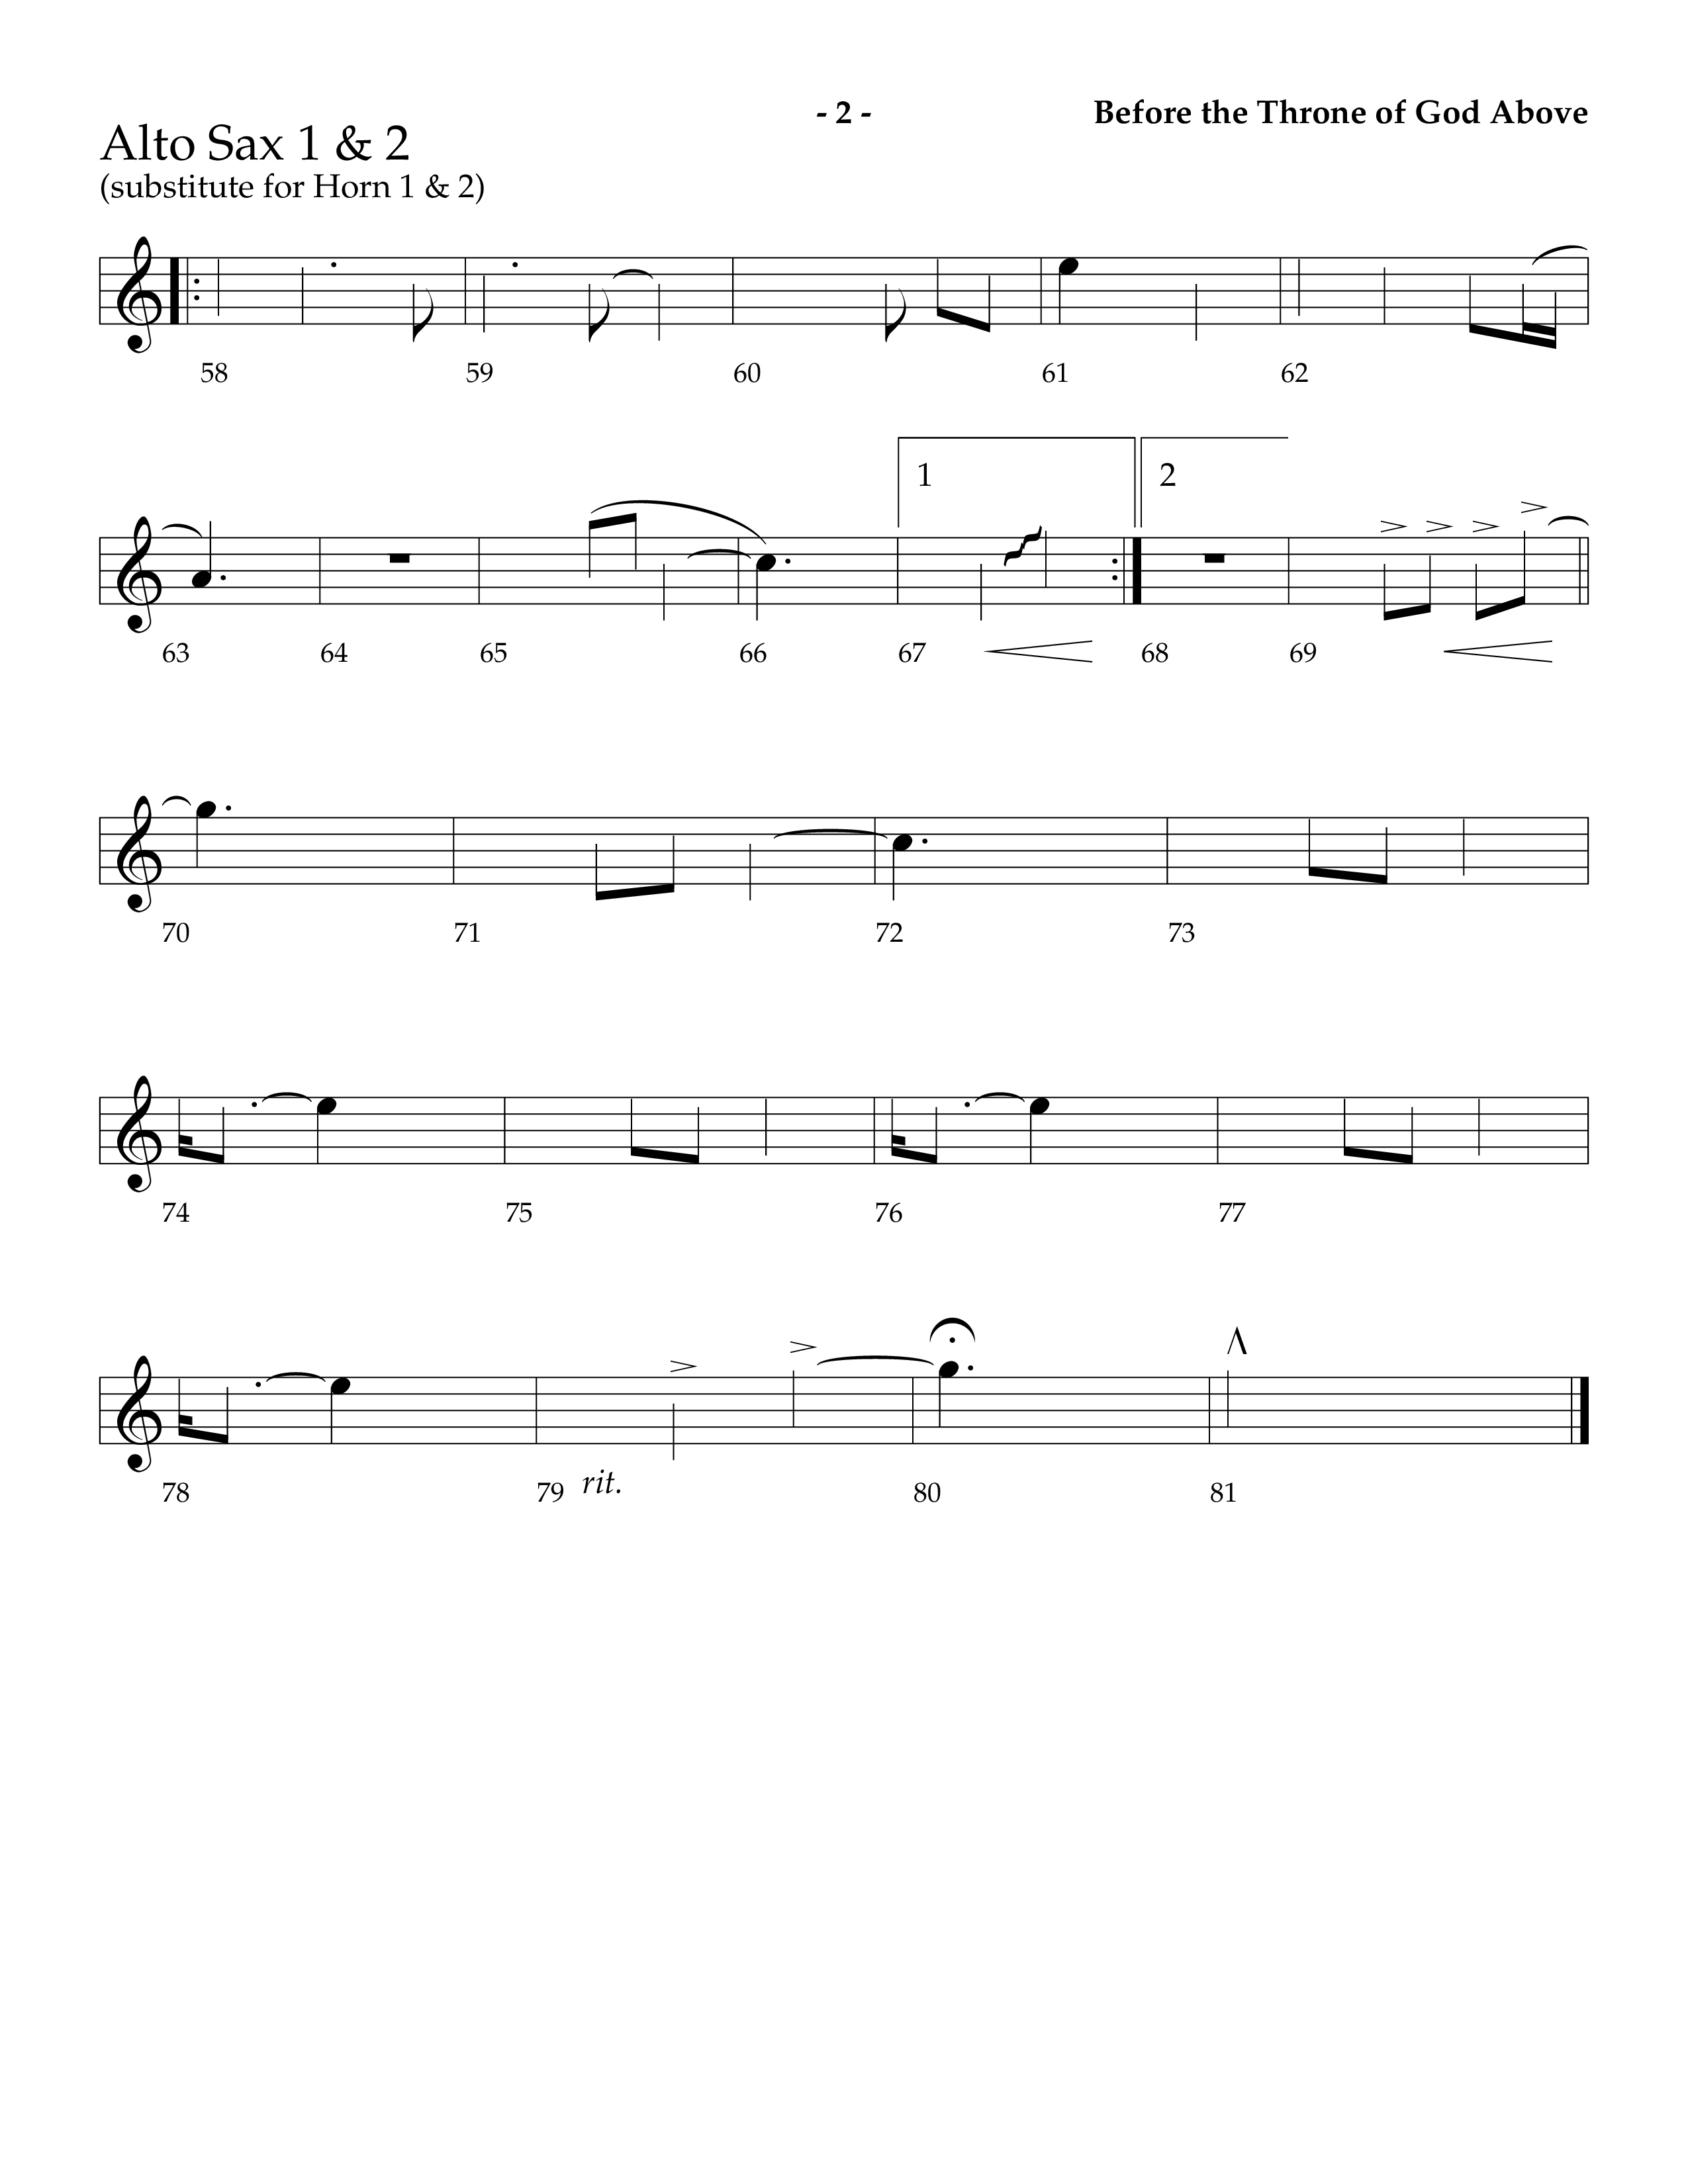 Before The Throne Of God Above (Choral Anthem SATB) Alto Sax 1/2 (Lifeway Choral / Arr. Camp Kirkland)